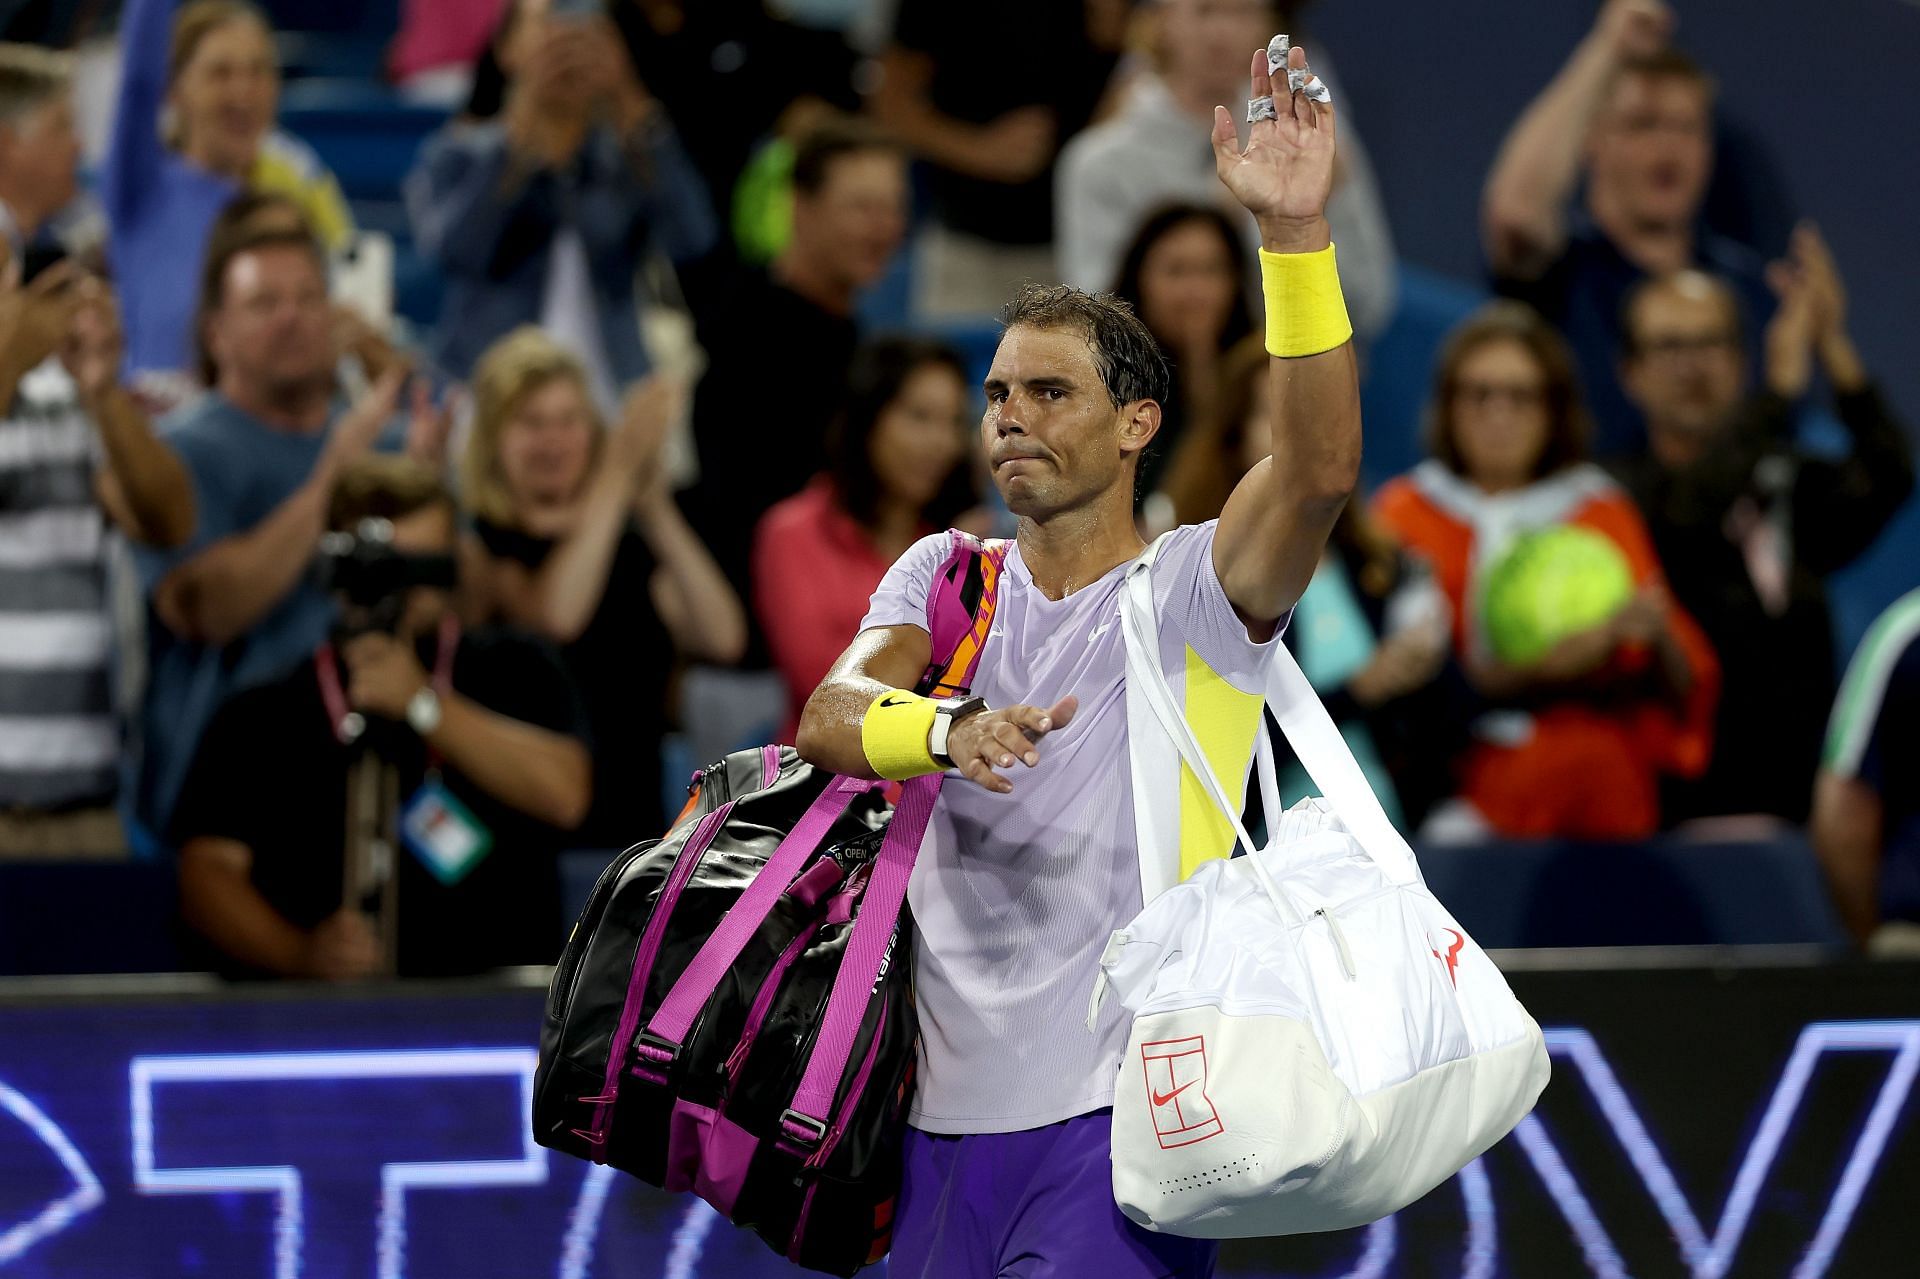 Rafael Nadal made an early exit at the 2022 Western &amp; Southern Open